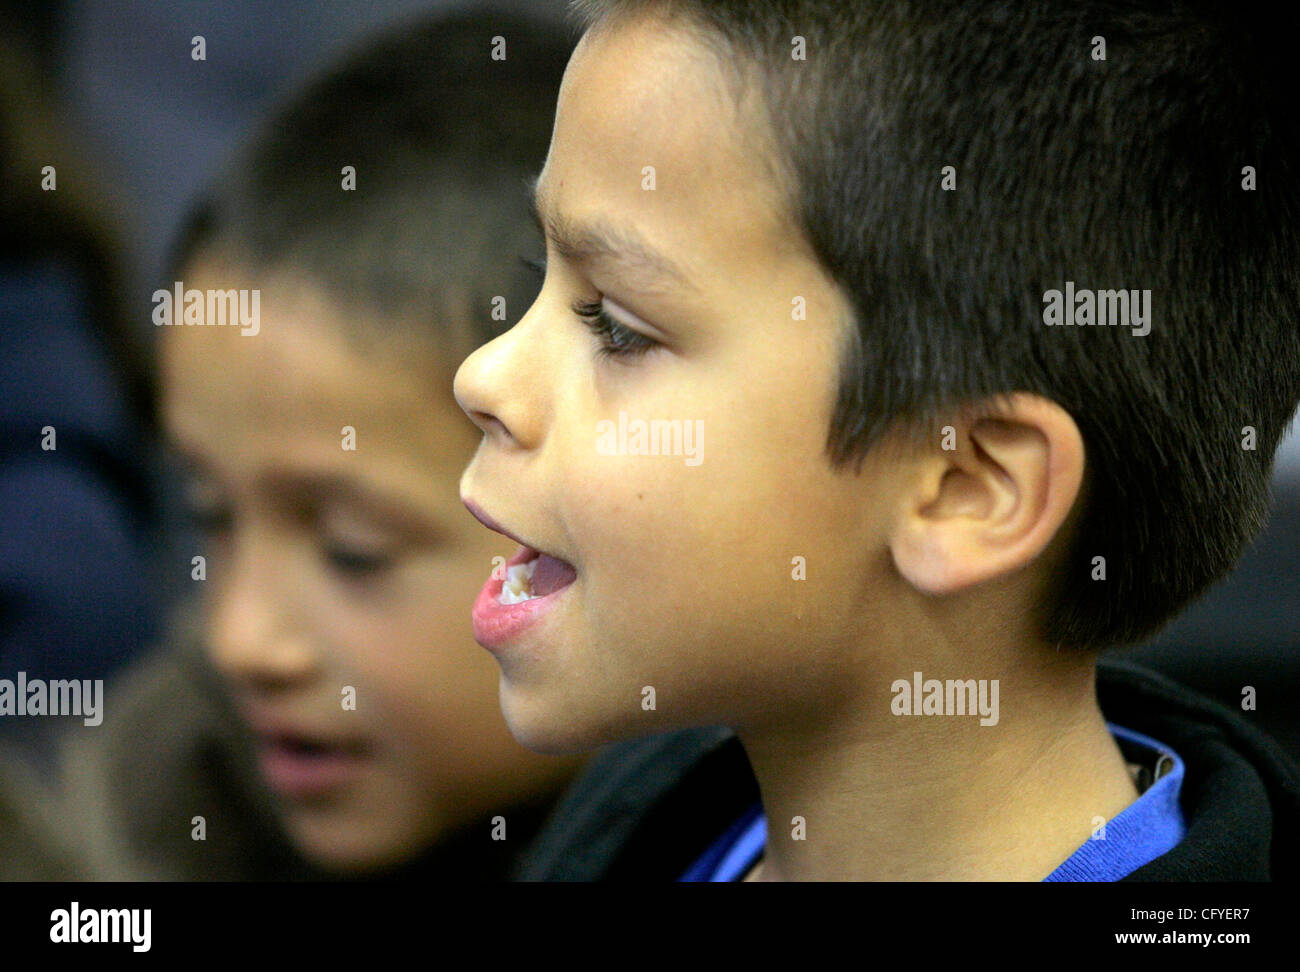 May 16, 2007, Oceanside, California_At San Luis Rey Elementary School first grader CYRUS GREENE sings along with a song being played on the guitar by teacher JENNY REES_Mandatory Credit: photo by Charlie Neuman/San Diego Union-Tribune/Zuma Press. copyright 2007 San Diego Union-Tribune Stock Photo